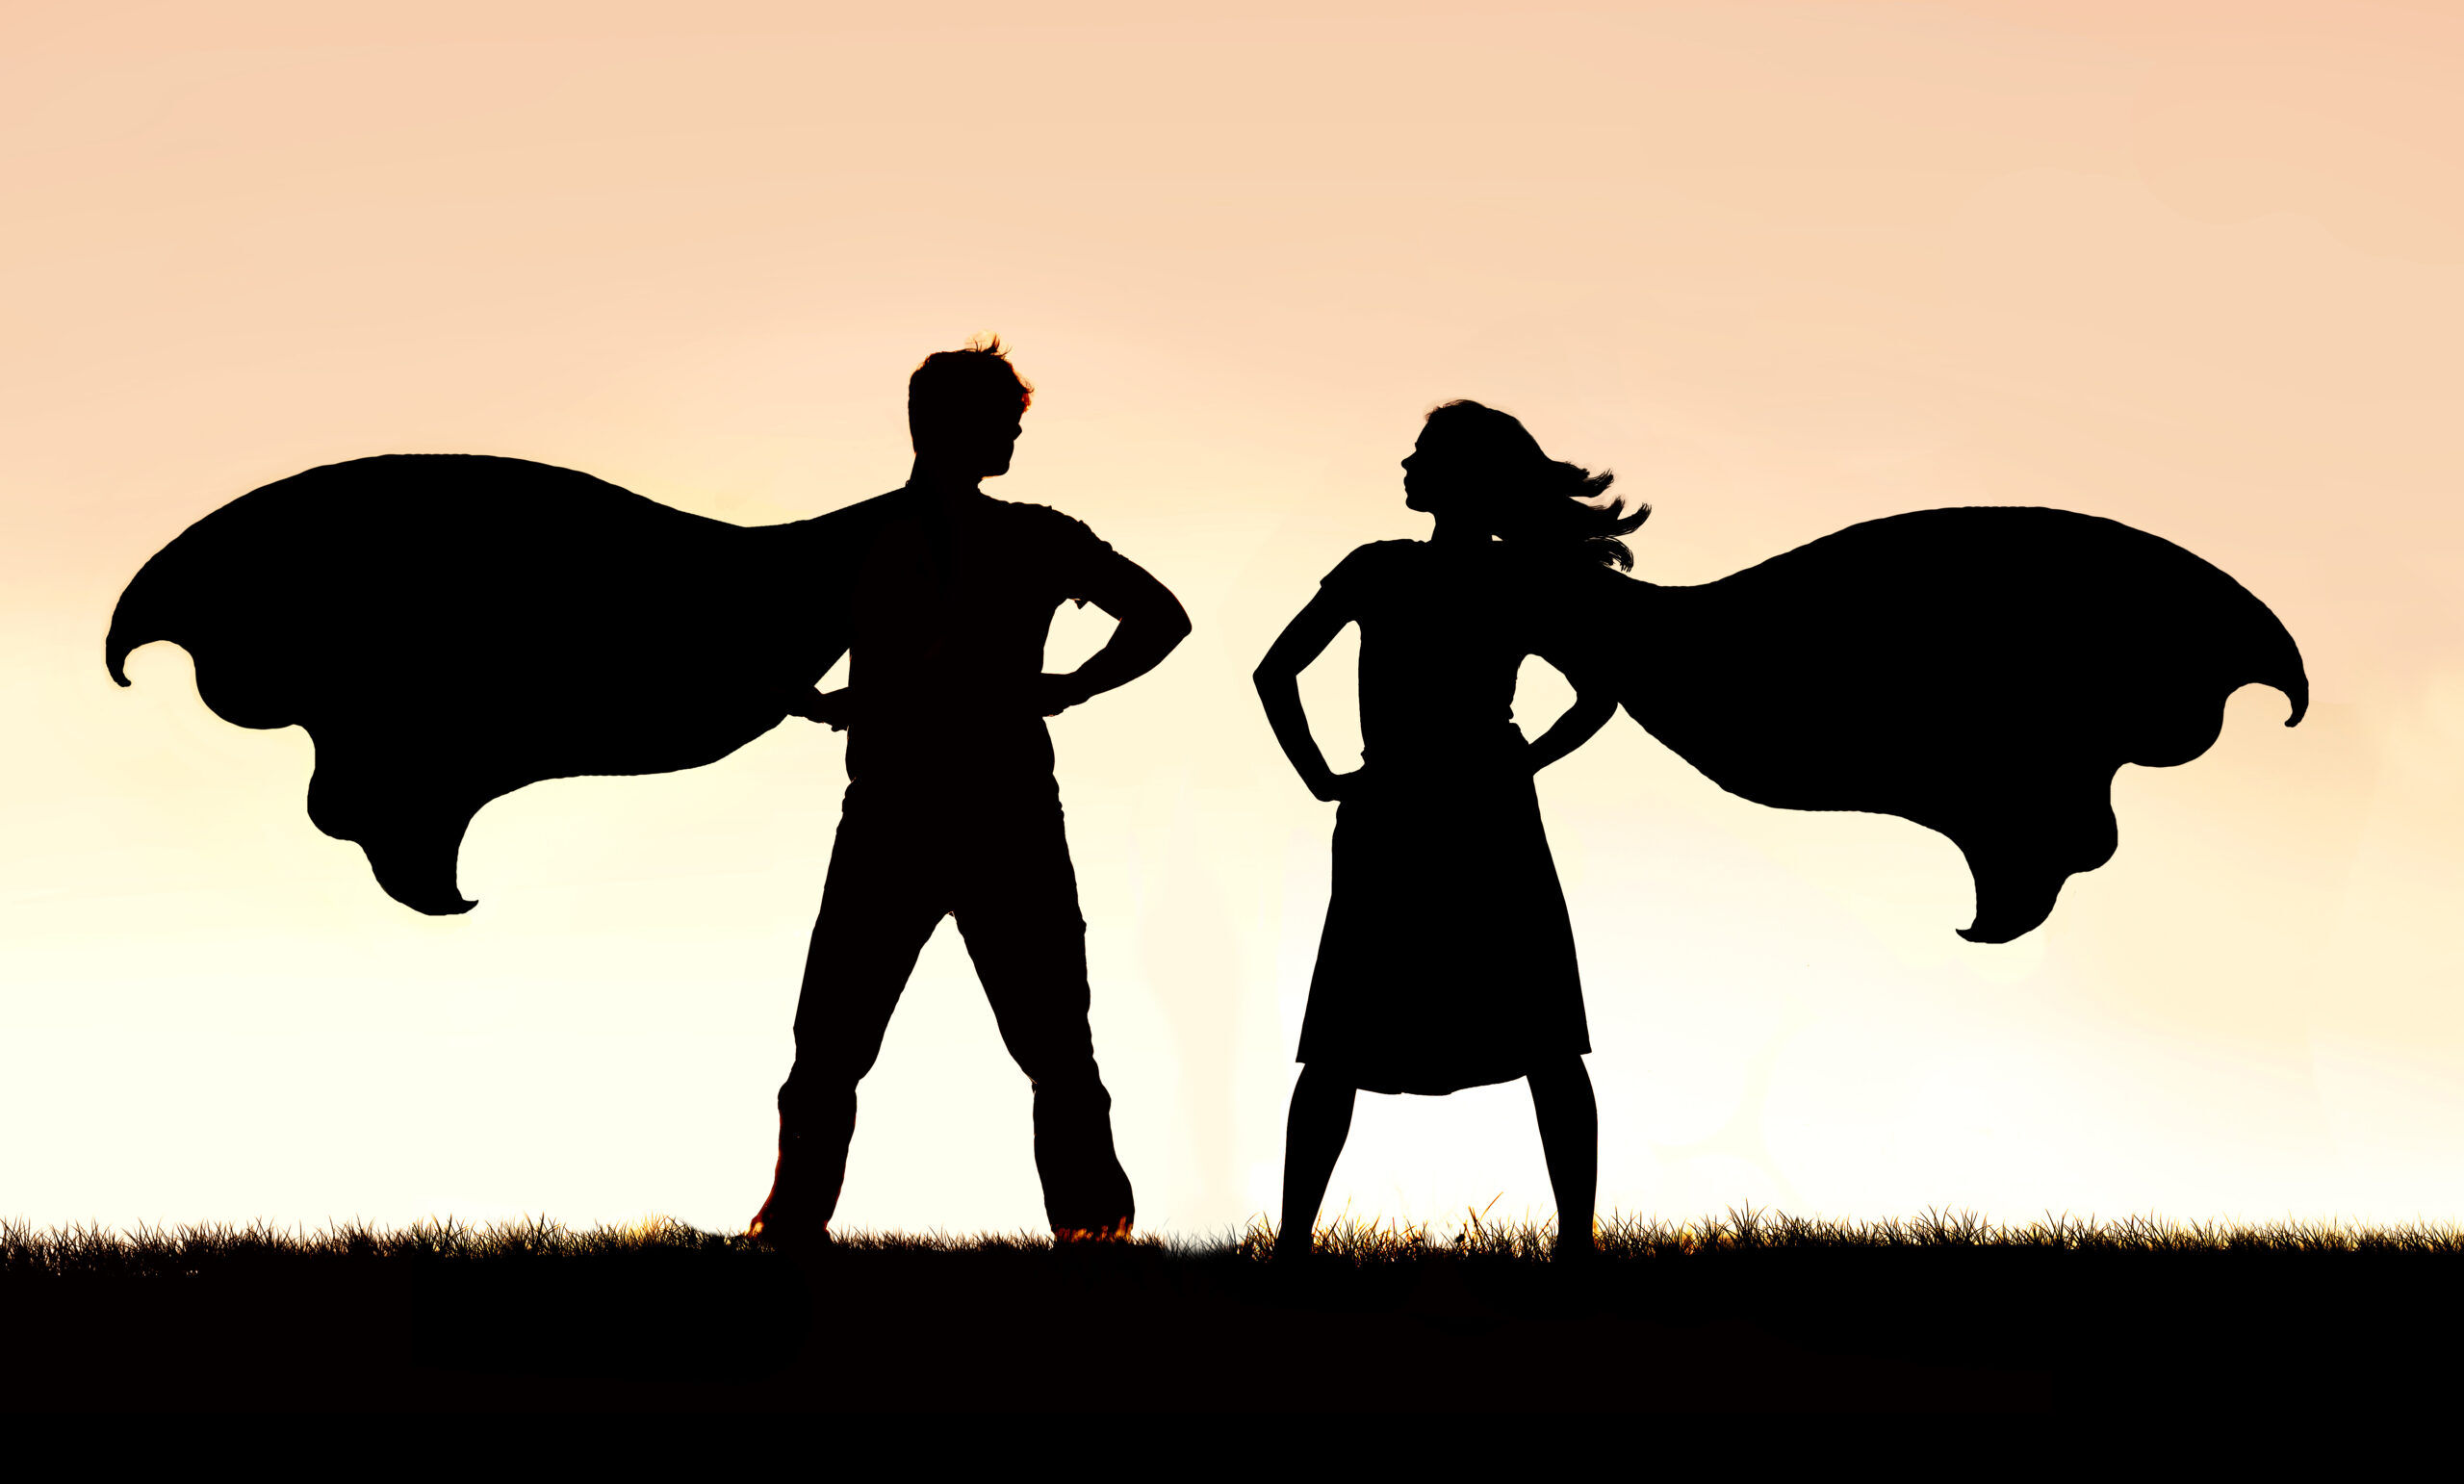 A silhouette of a superhero man and woman couple in capes standing strong and powerful against a sunset sky background.